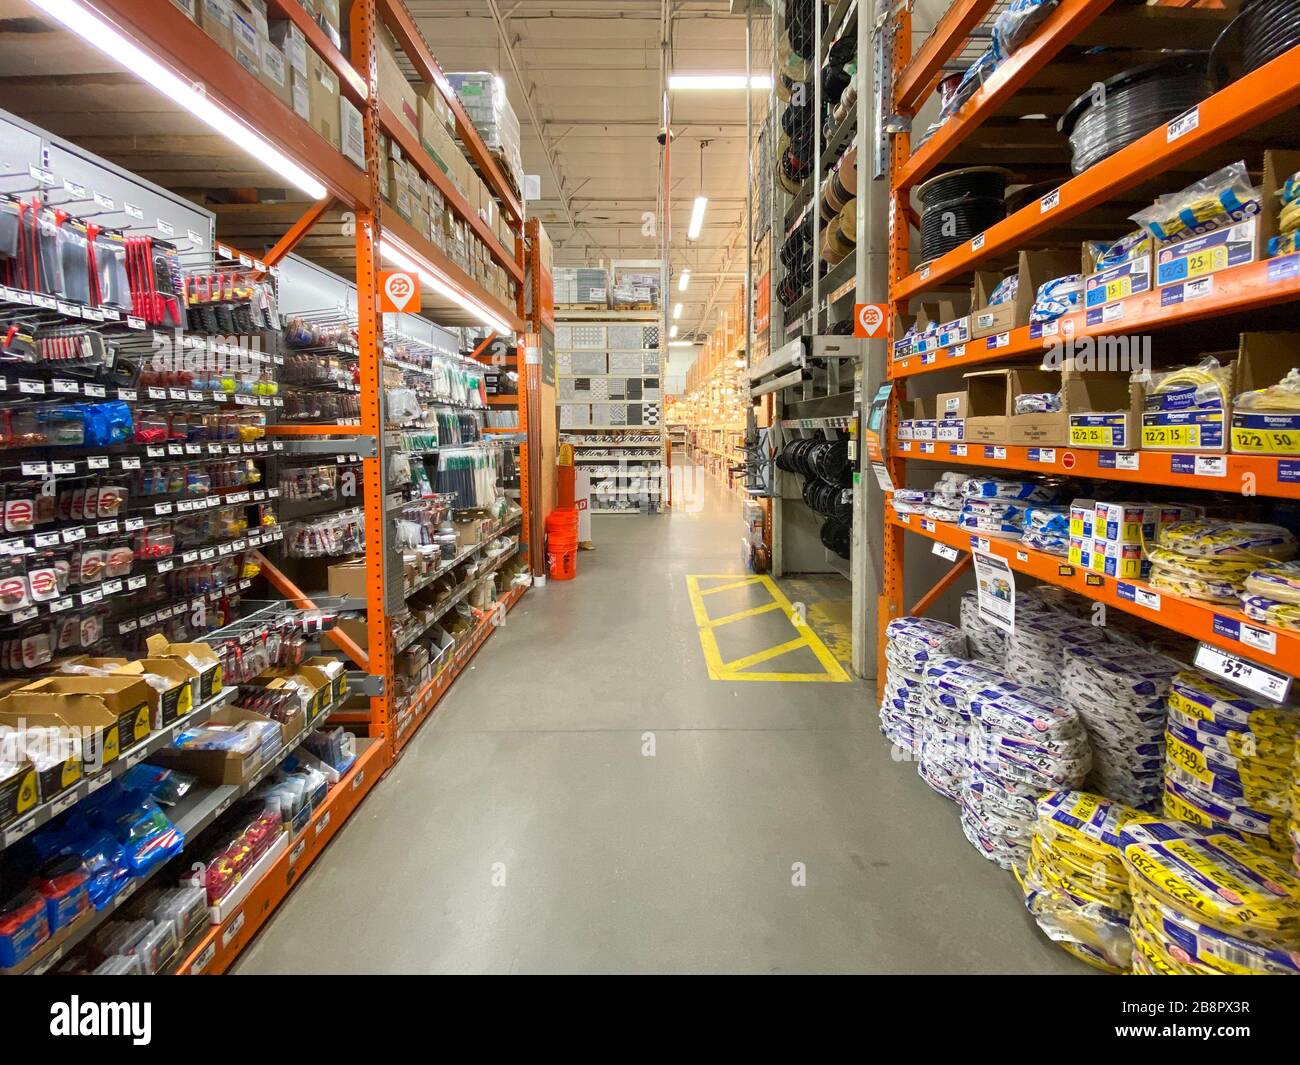 The Home Depot store department section aisles in San Diego, California, USA. The Home Depot is the largest home improvement retailer and construction service in the US. March, 15h, 2020 Stock Photo